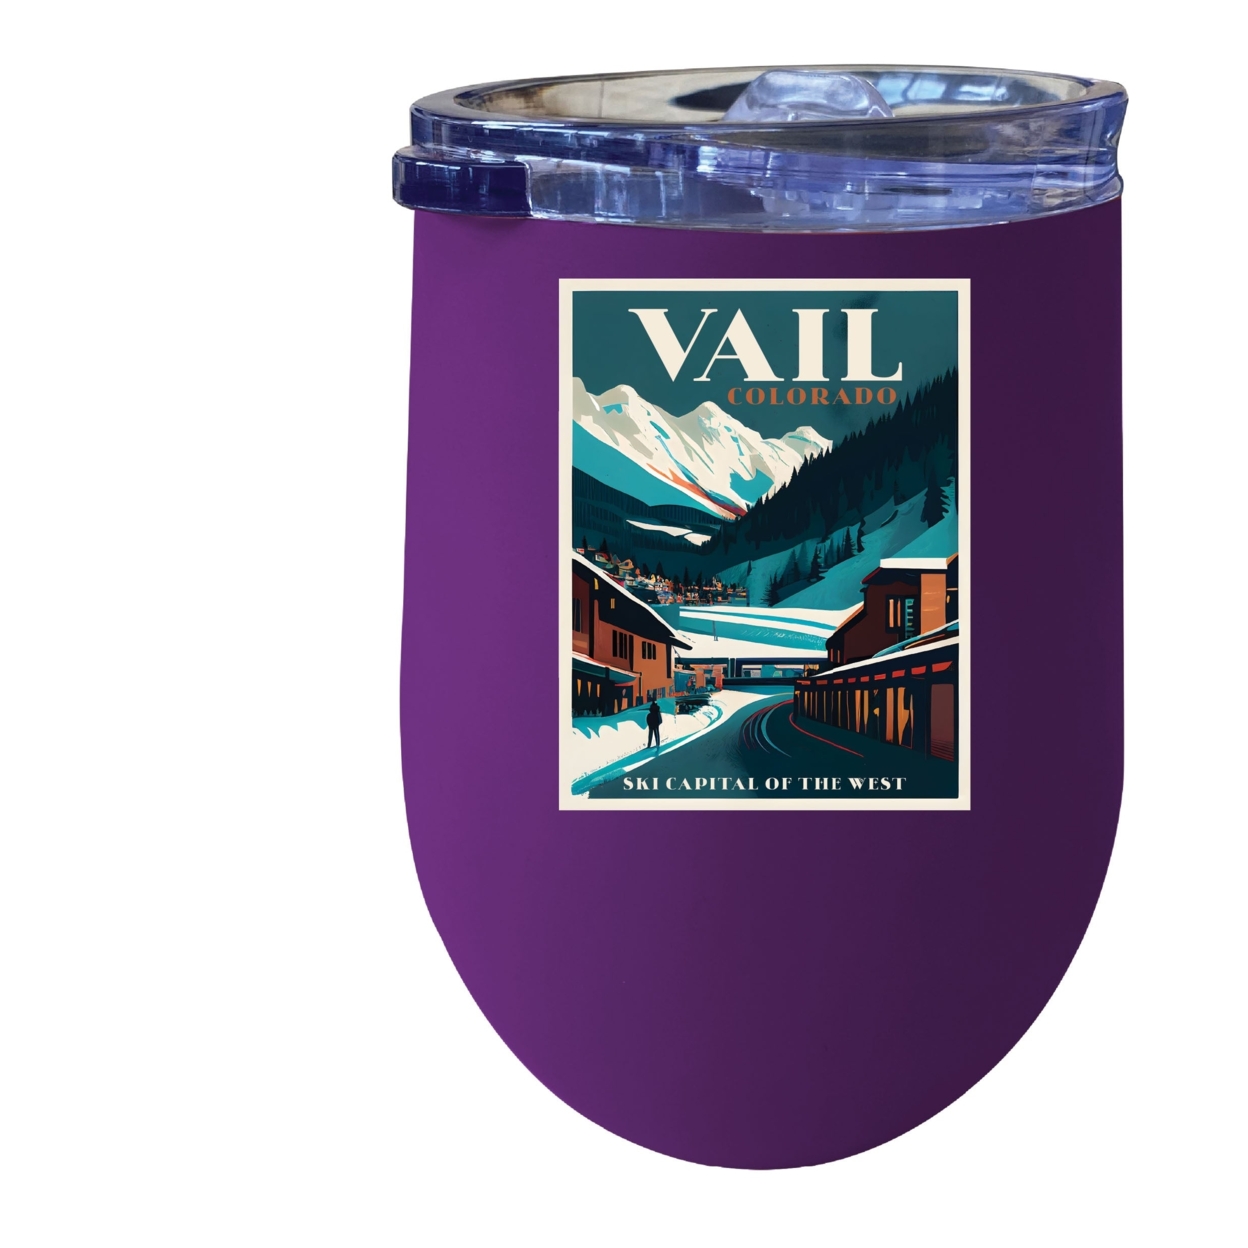 Vail Colorado Souvenir 12 Oz Insulated Wine Stainless Steel Tumbler - Coral